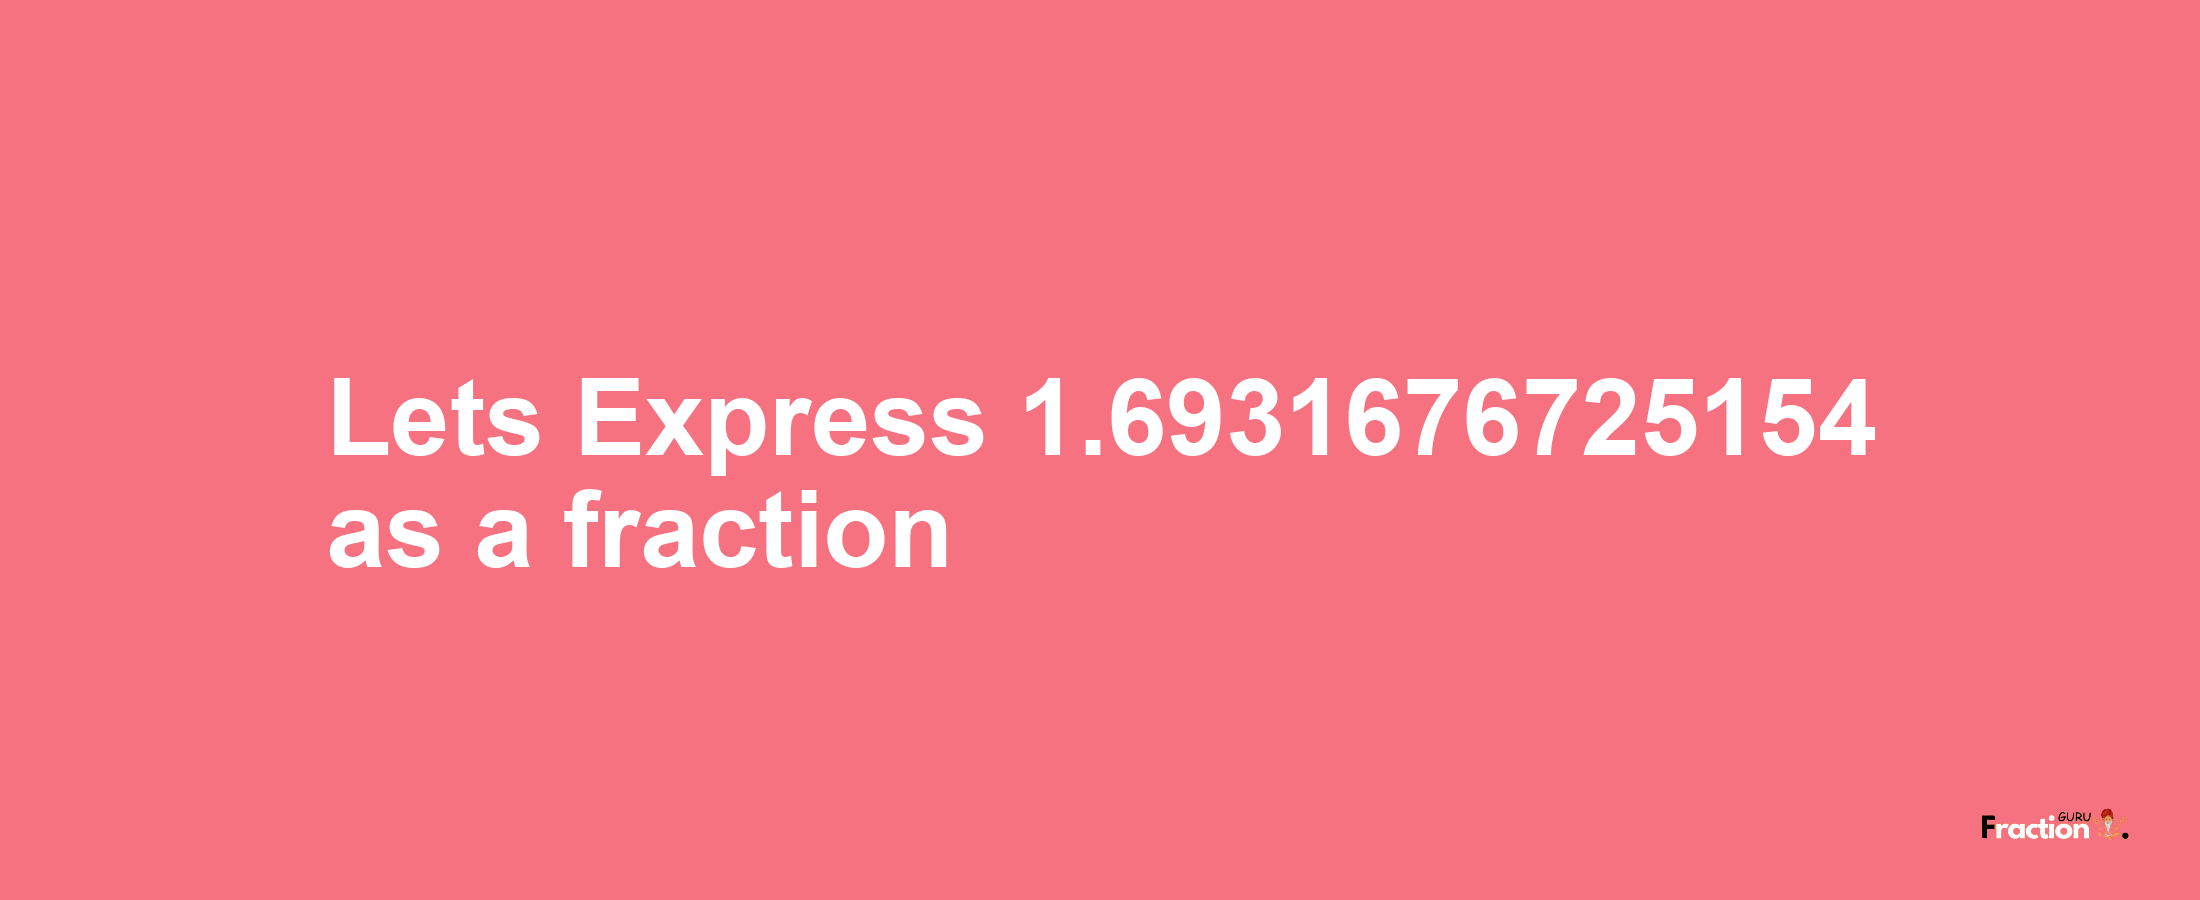 Lets Express 1.6931676725154 as afraction